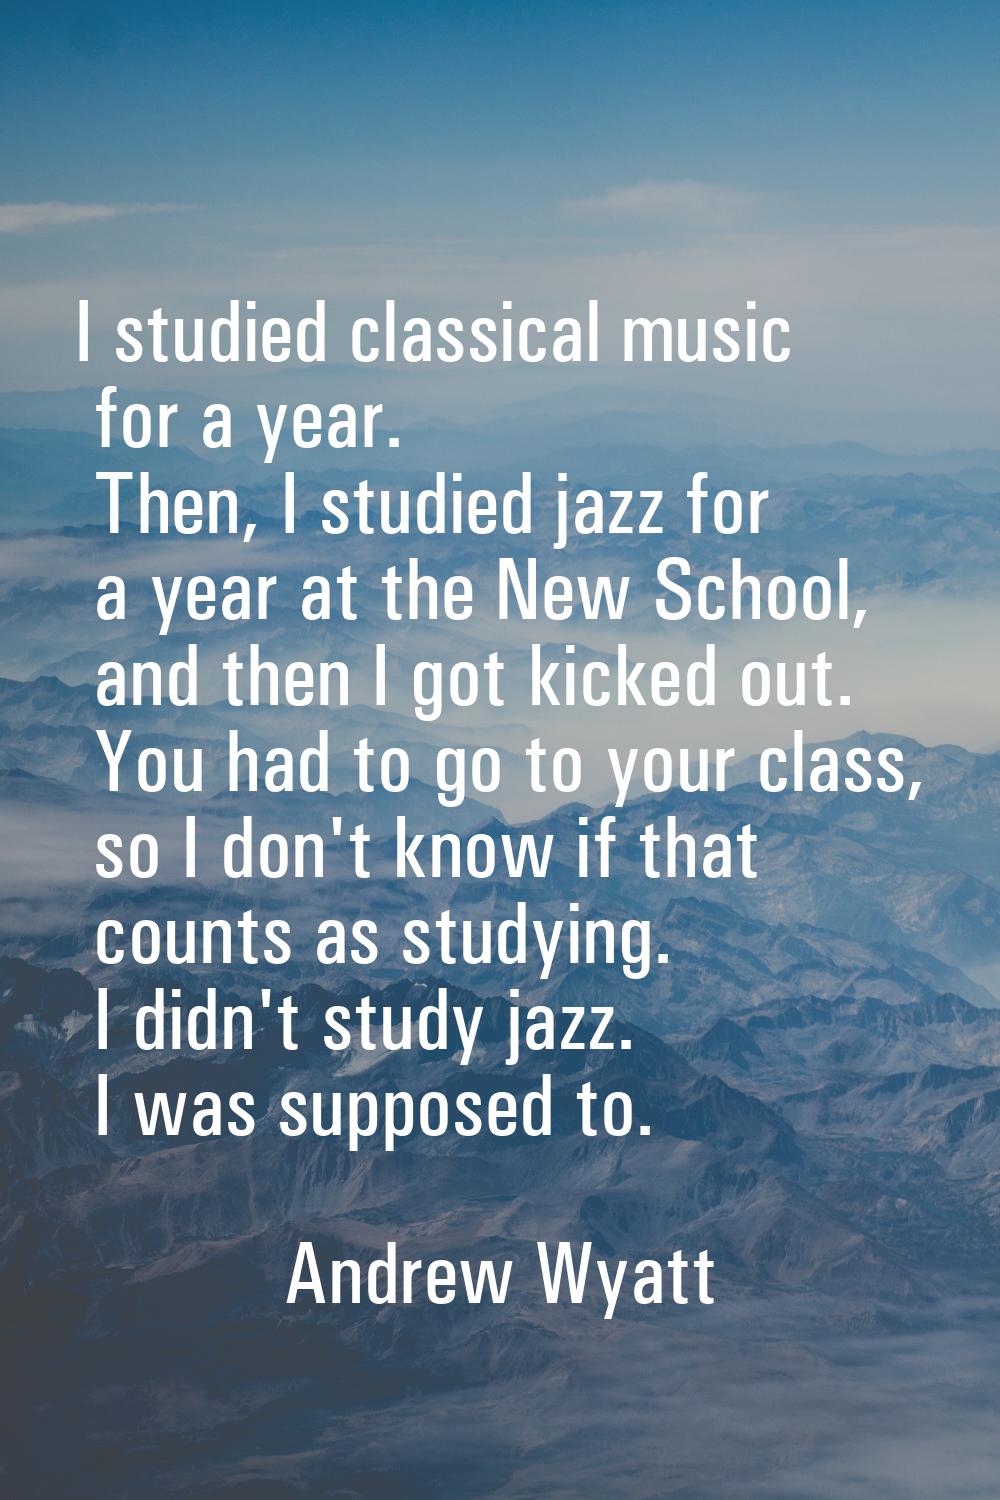 I studied classical music for a year. Then, I studied jazz for a year at the New School, and then I